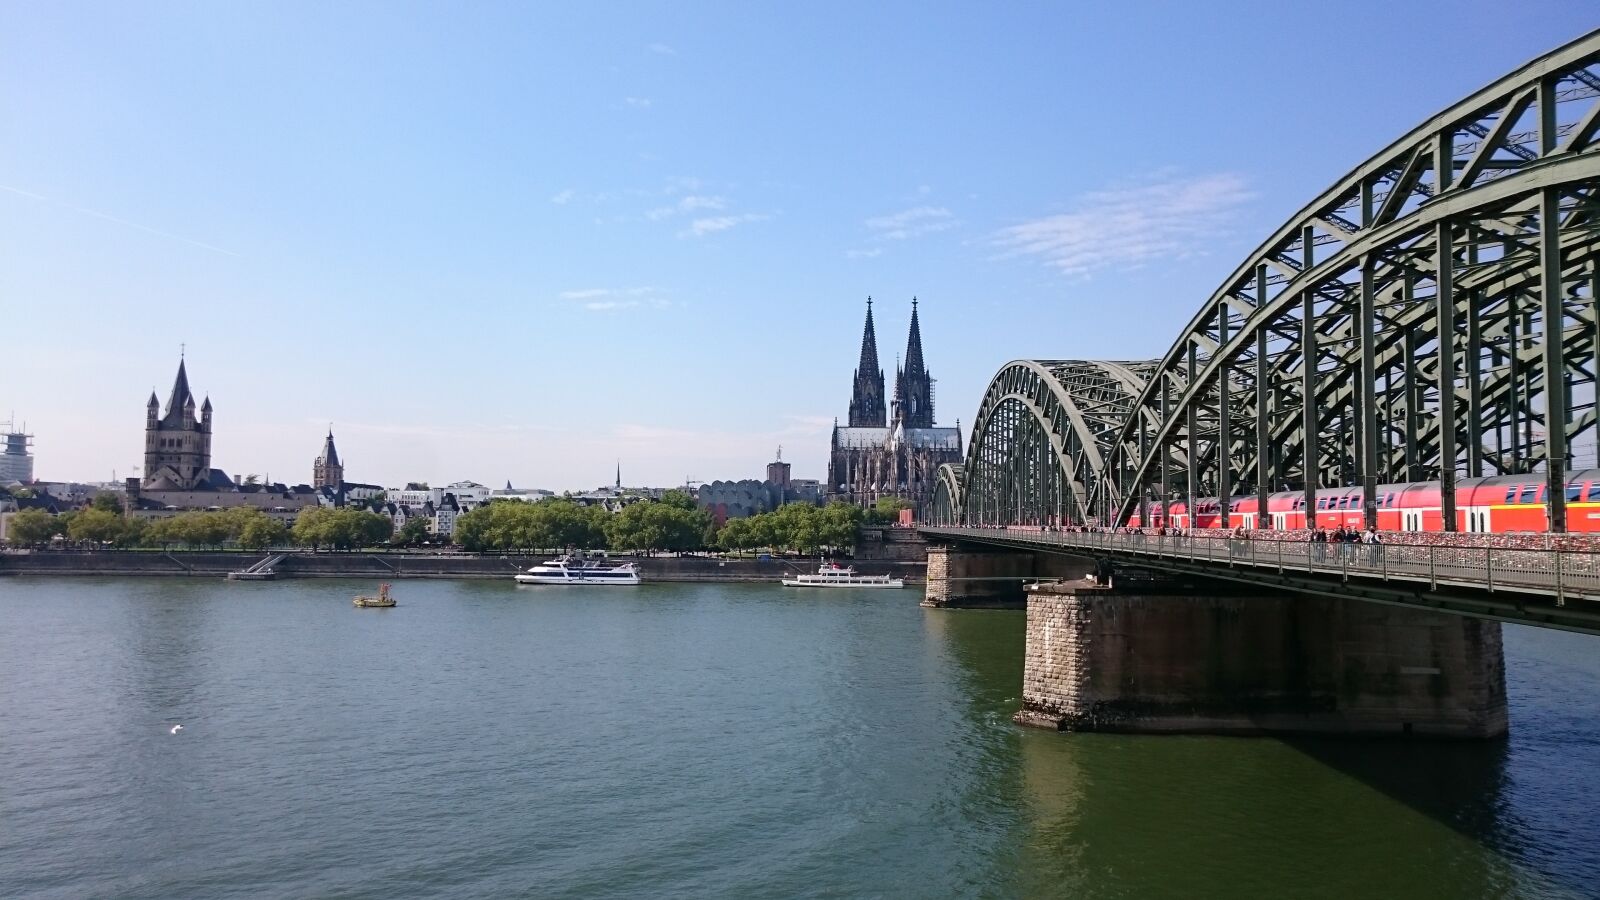 Sony Xperia Z3 sample photo. Dusseldorf, germany, architecture photography